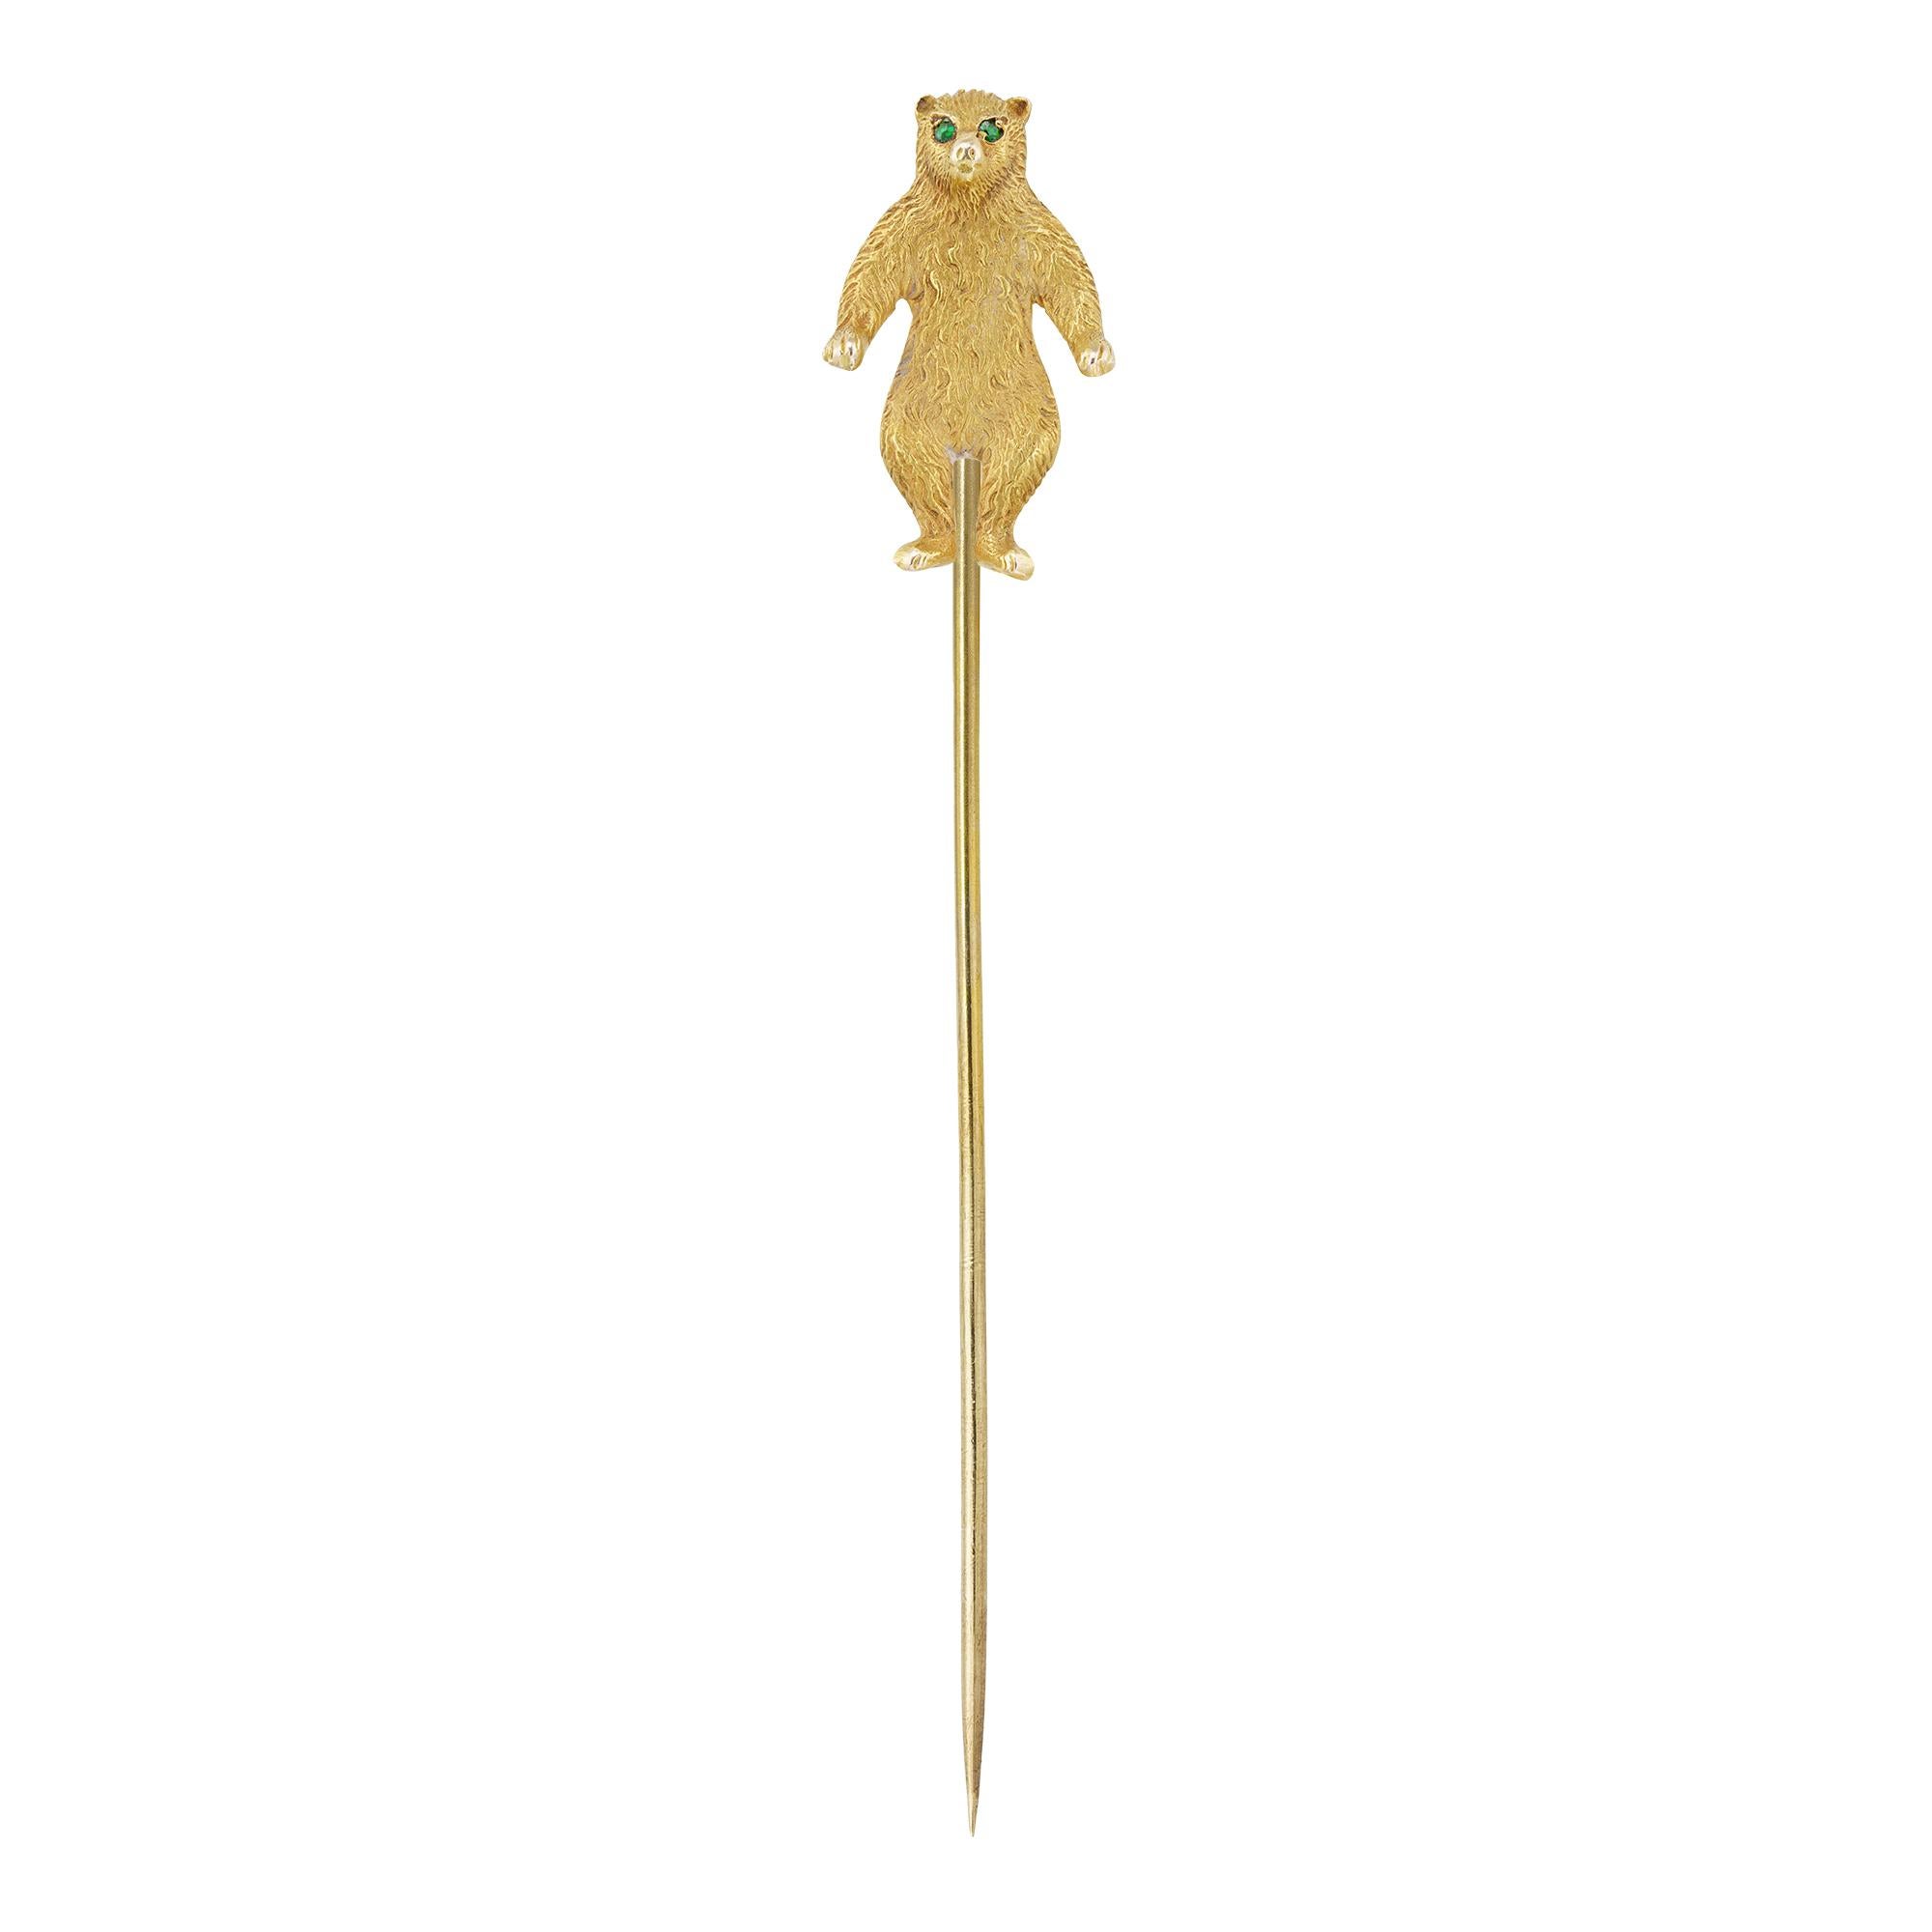 An early 20th century gold bear stickpin, the body with finely engraved details, the eyes set with demantoid garnet, all mounted in 14ct yellow gold, circa 1910, measuring 2.1 x 1.2cm, the pin measuring 6cm long, gross weight 2.4 grams.

This